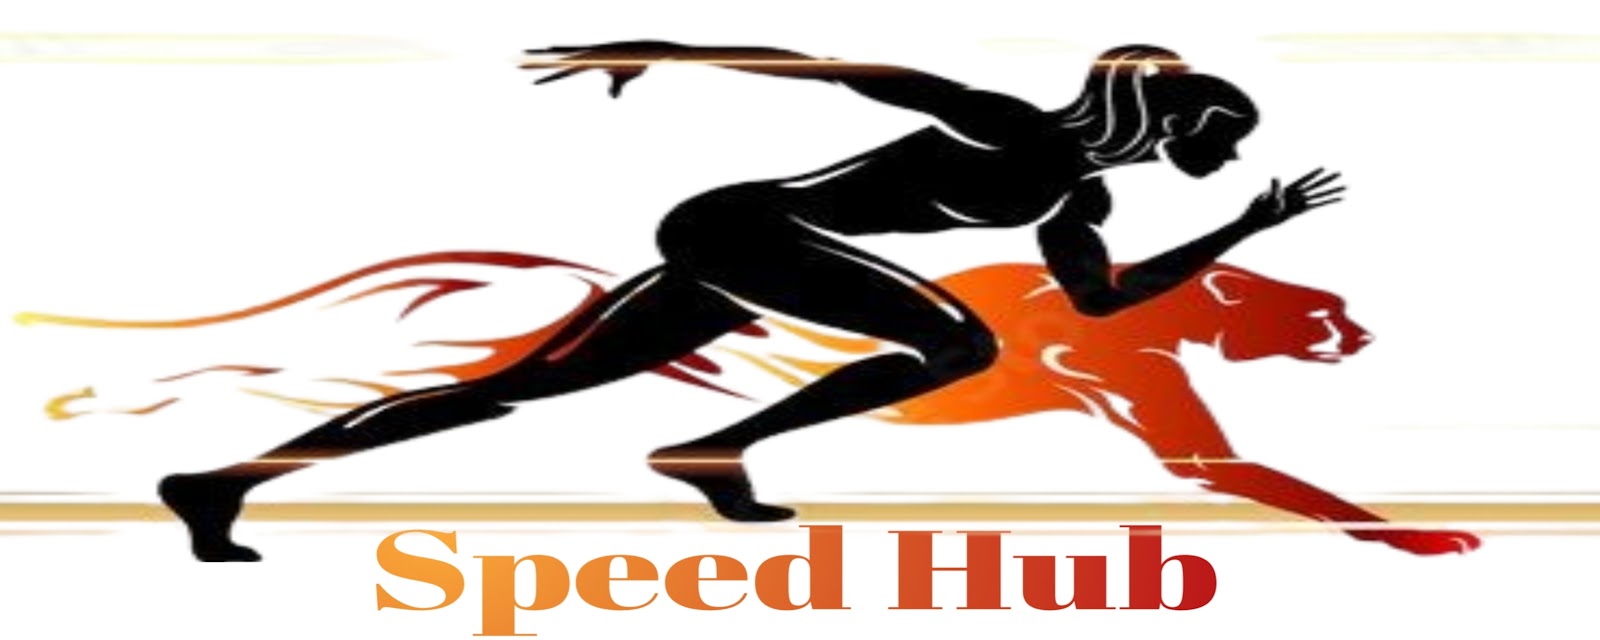 Speedhub: Your go-to for Sarkari job prep. Expert guidance, study materials, mock tests, and more.